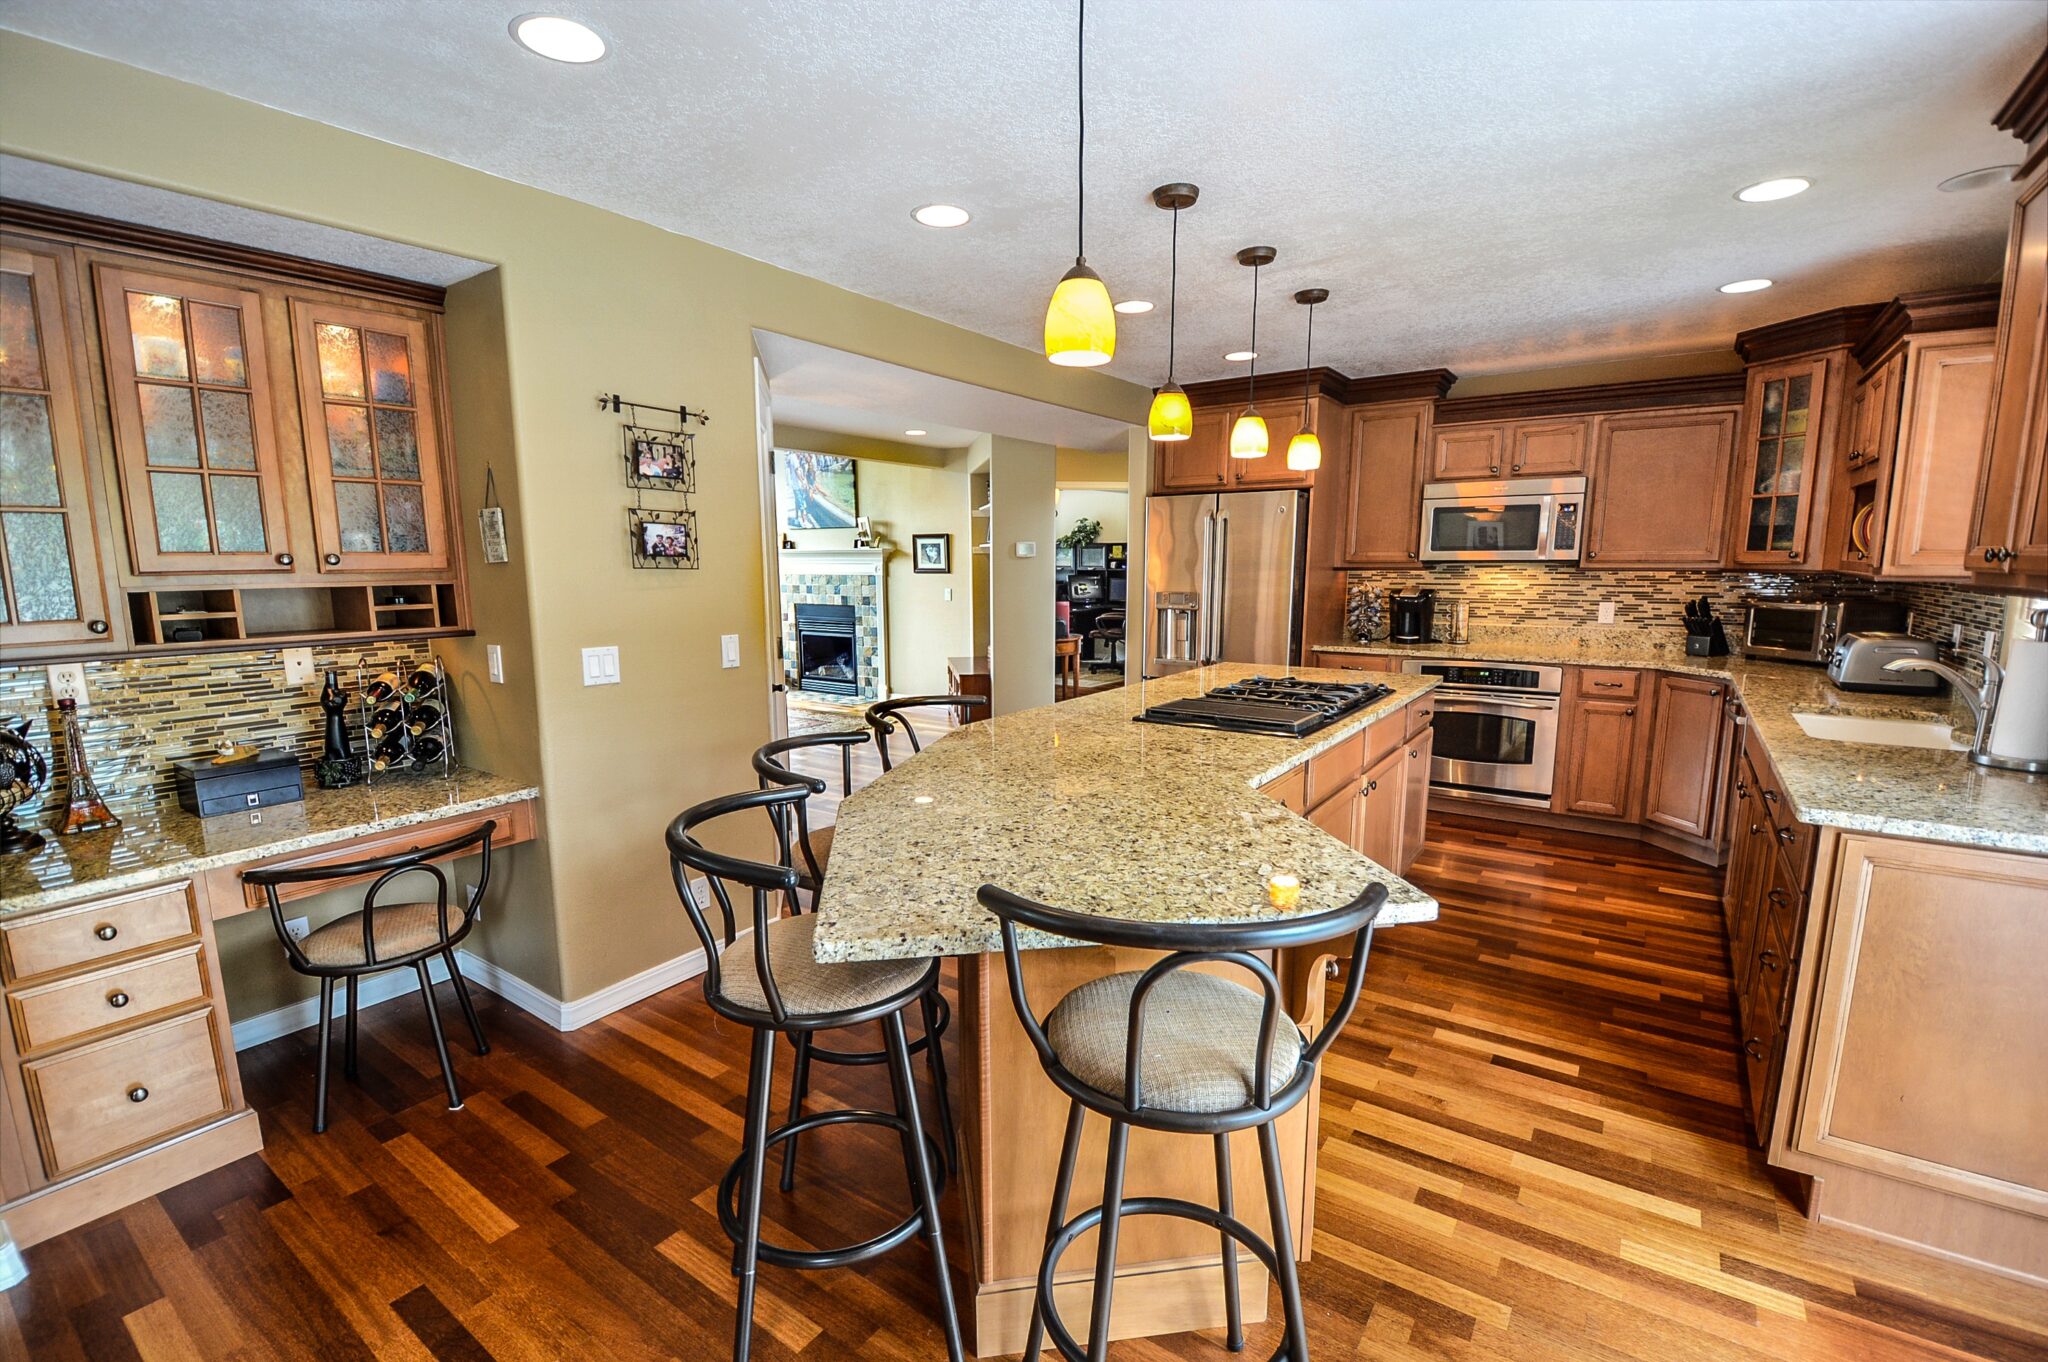 The Pros and Cons of a Kitchen Island